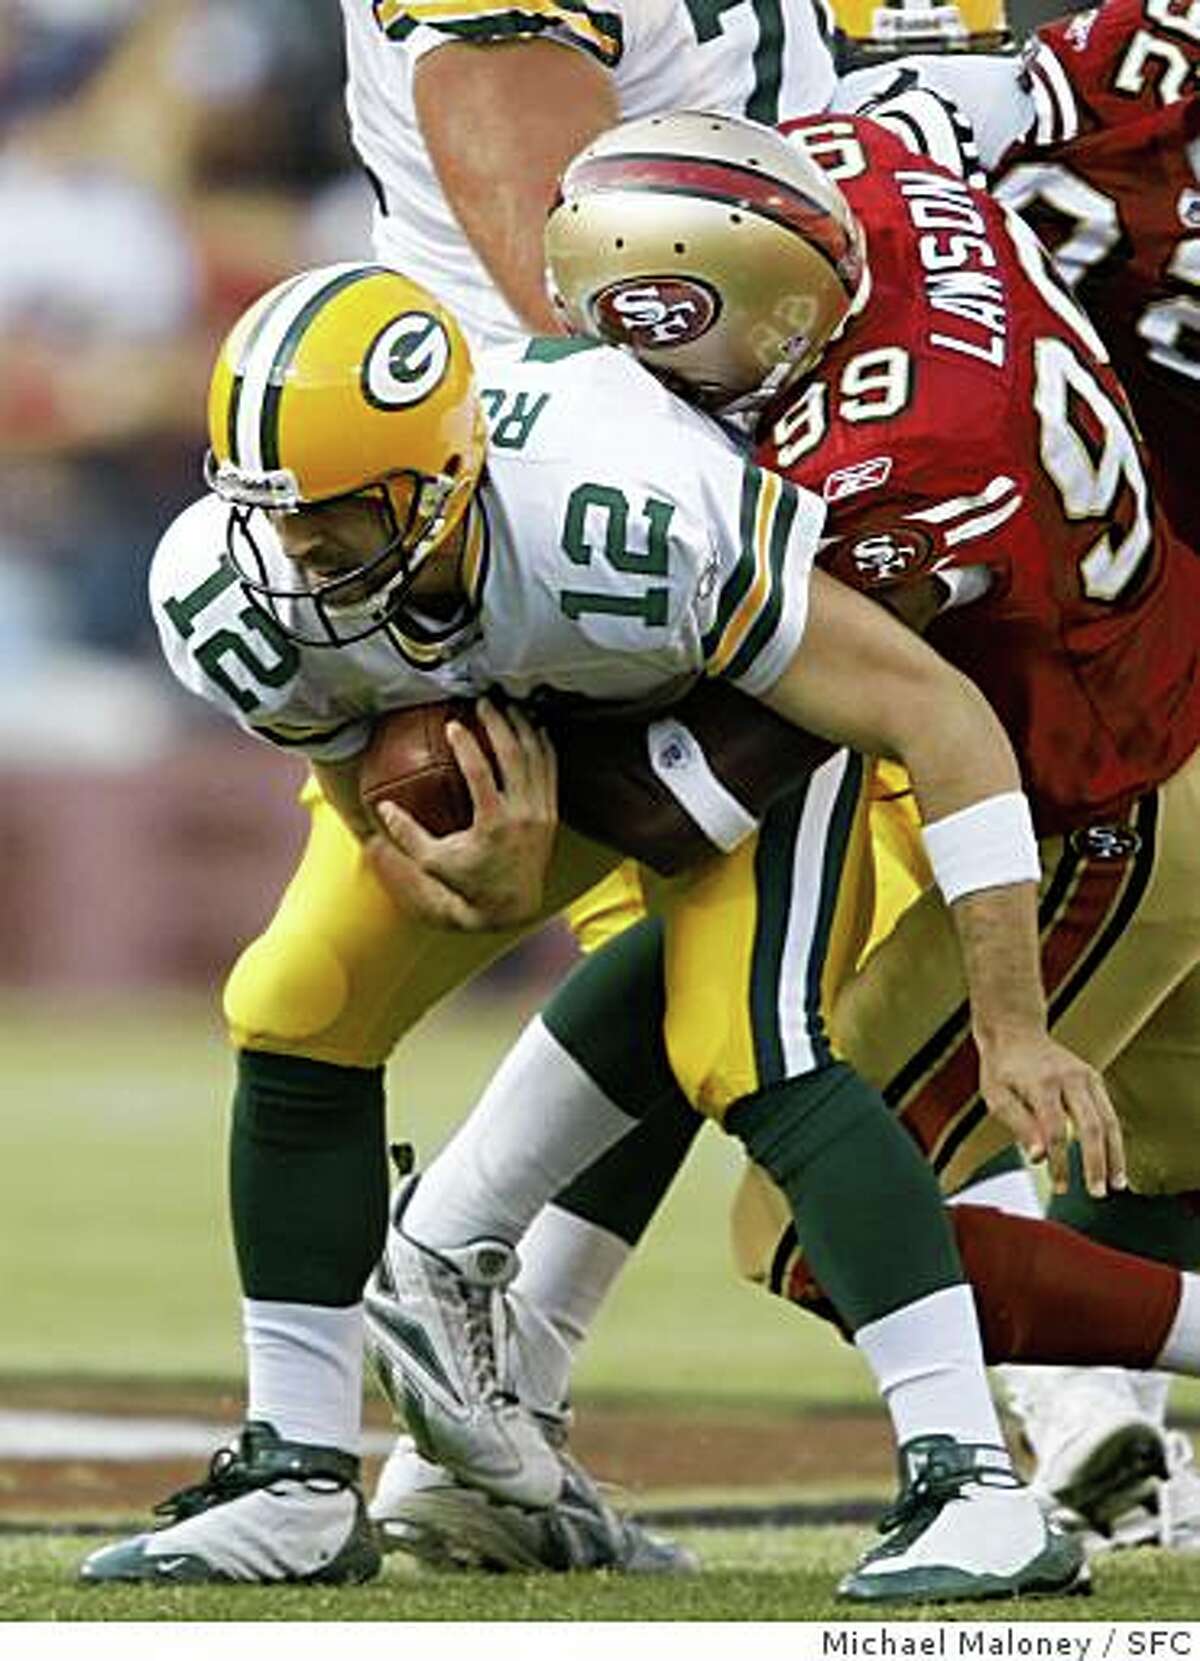 Green Bay Packers quarterback Aaron Rodgers is sacked by 49ers Manny Lawson in the 1st quarter.The San Francisco 49ers host the Green Bay Packers in an NFL preseason game at Candlestick Park in San Francisco, Calif., on August 16, 2008.